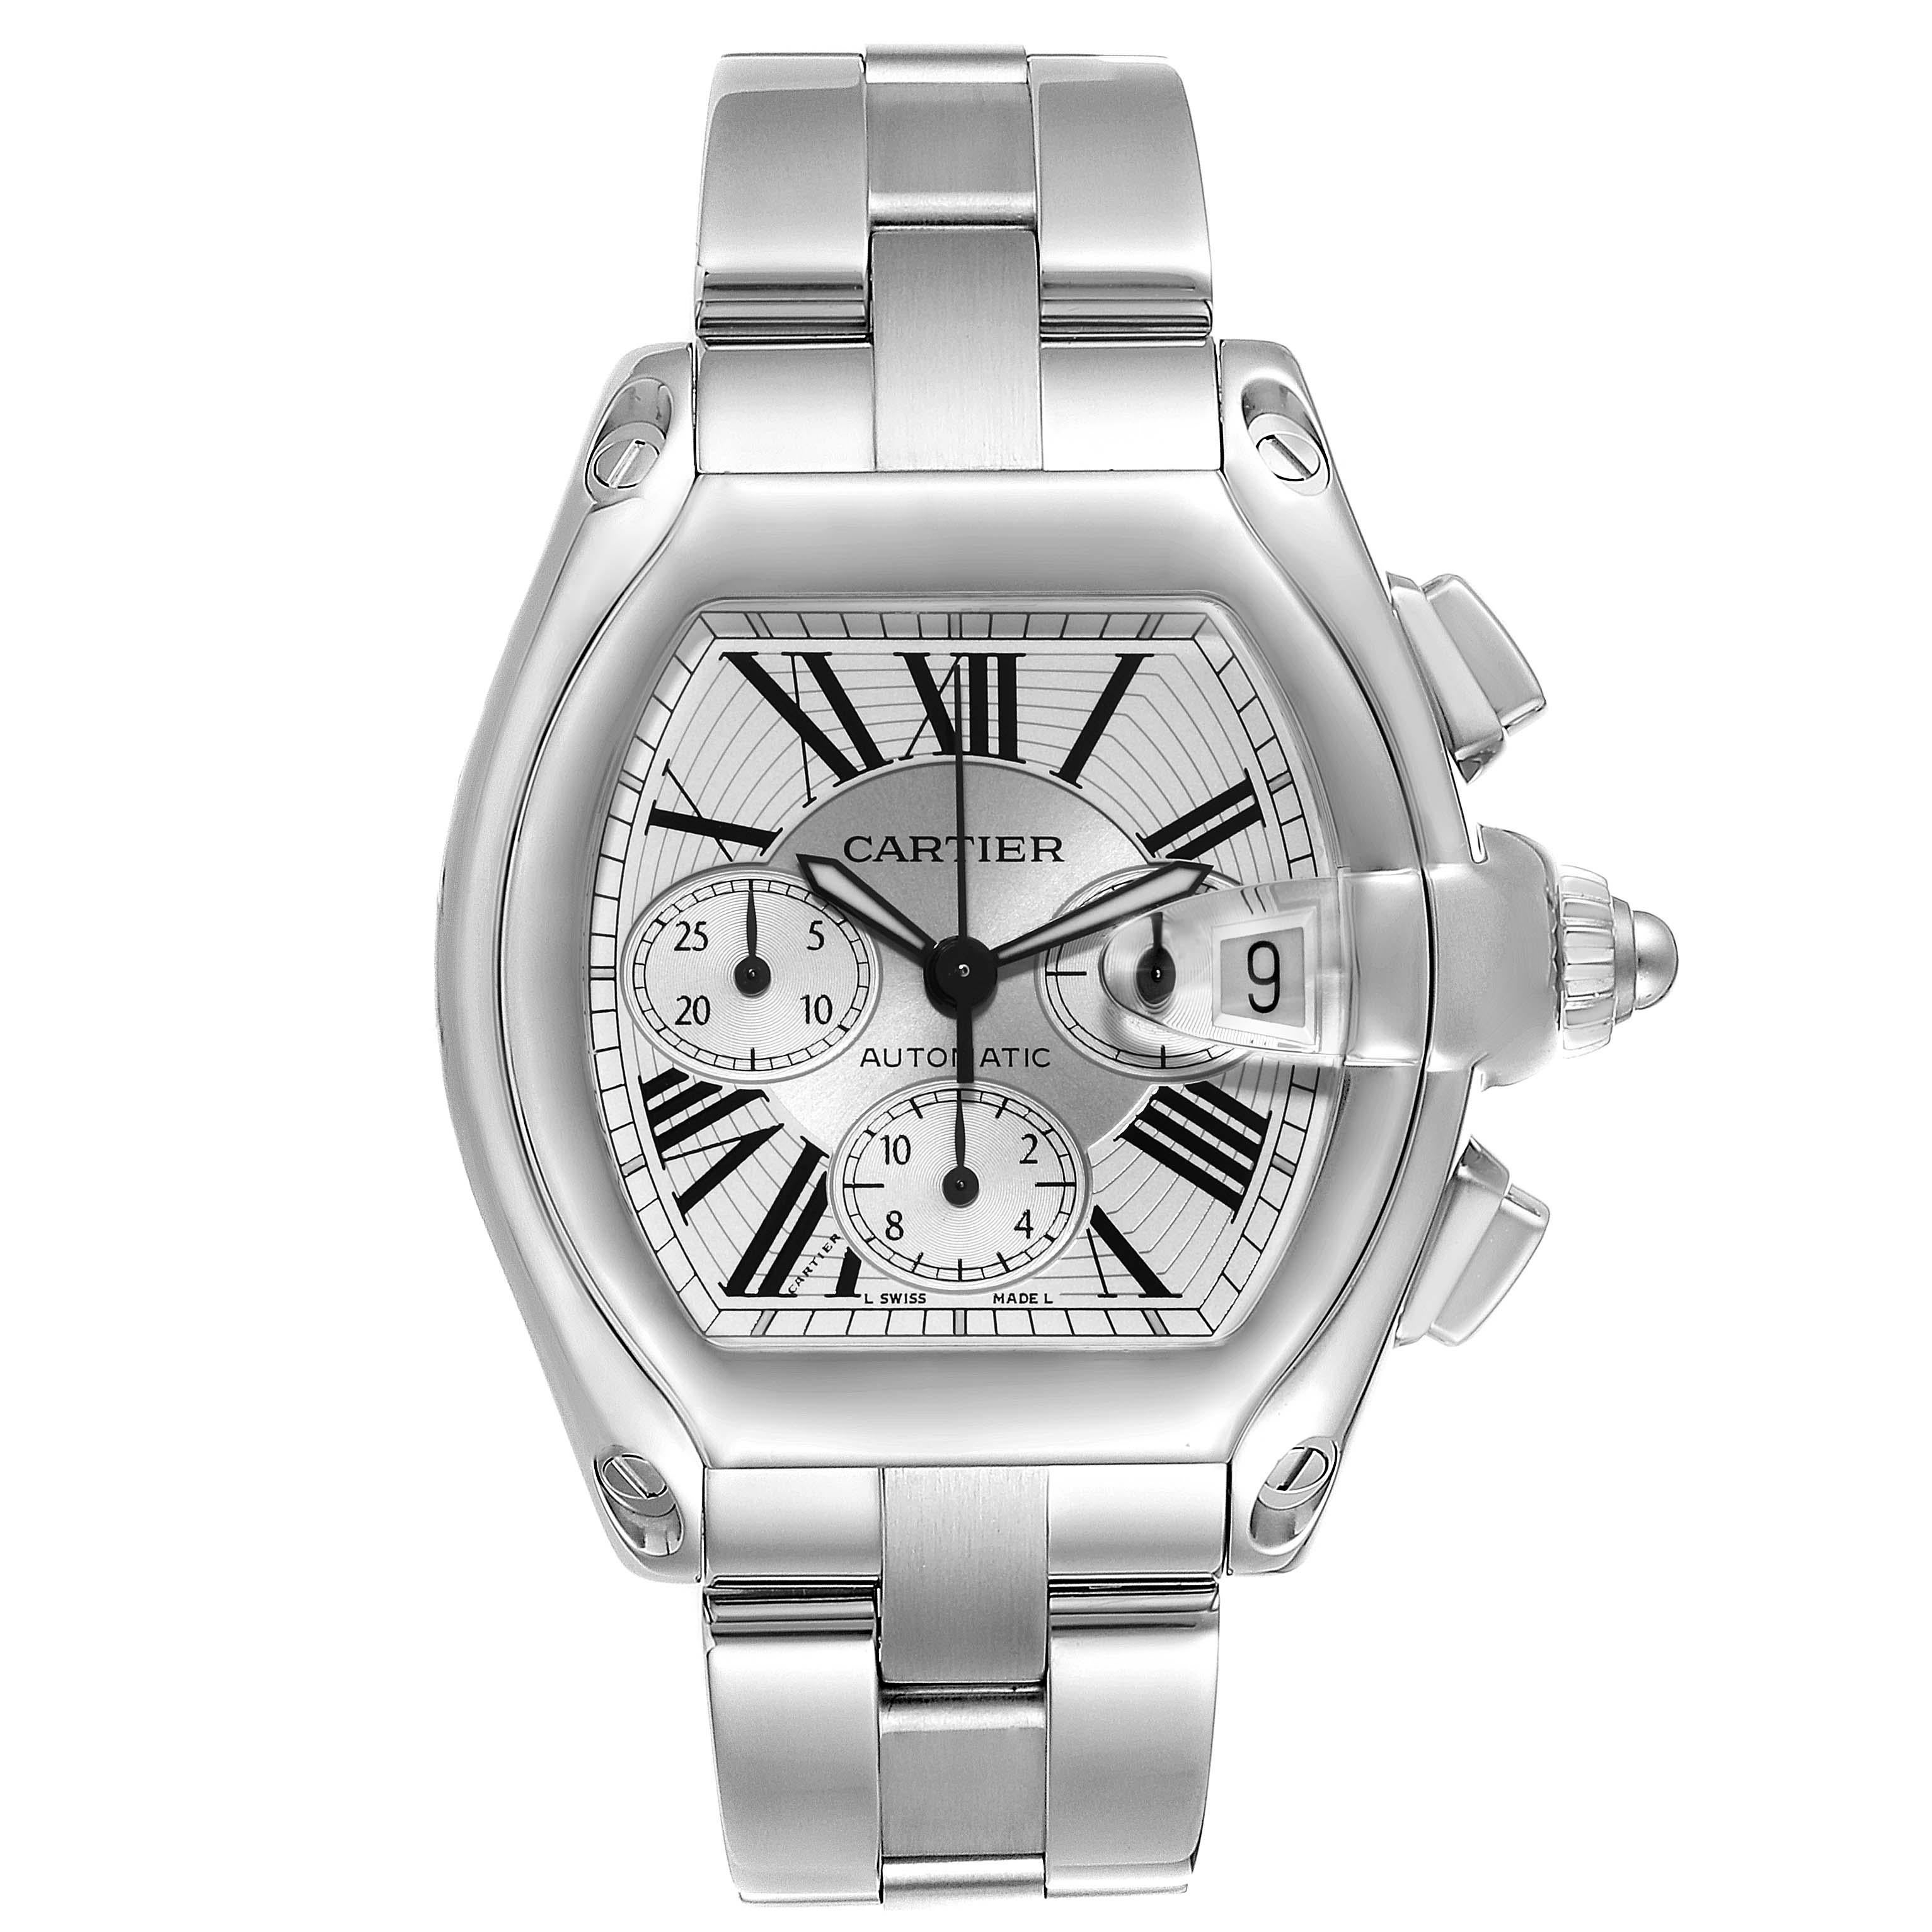 Cartier Roadster XL Chronograph Steel Mens Watch W62019X6 Box Papers In Excellent Condition For Sale In Atlanta, GA